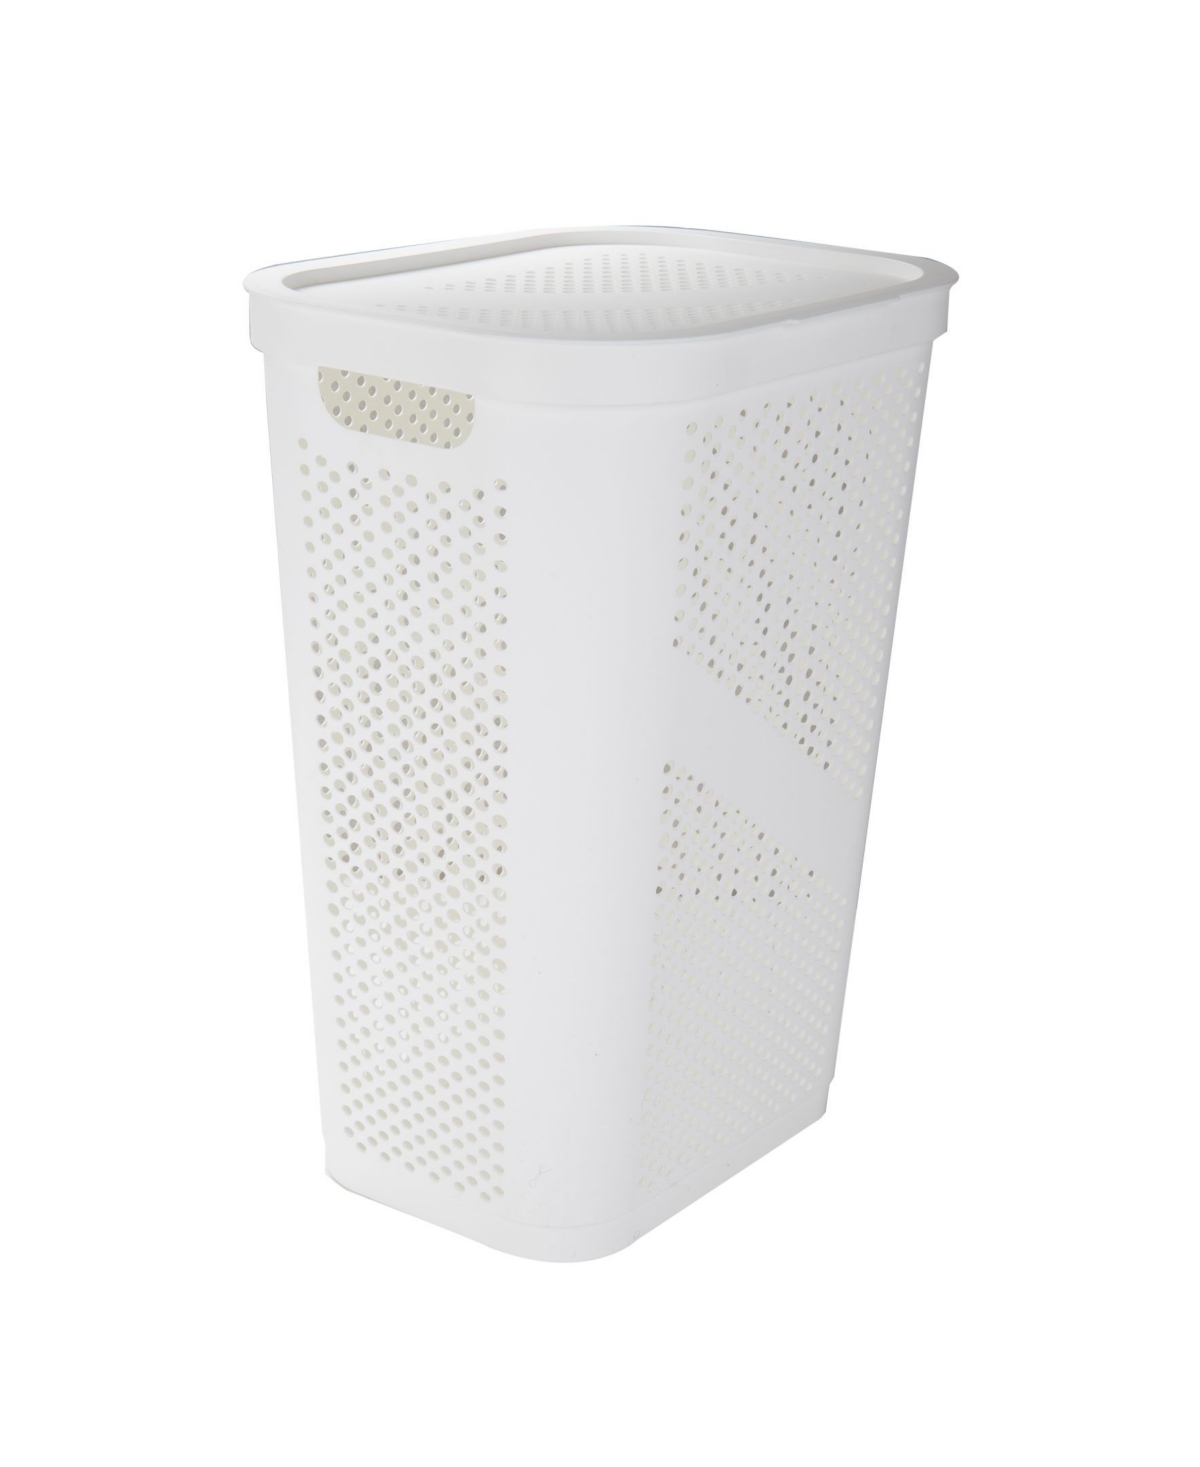 Perforated Lightweight Laundry Hamper with Lid - White